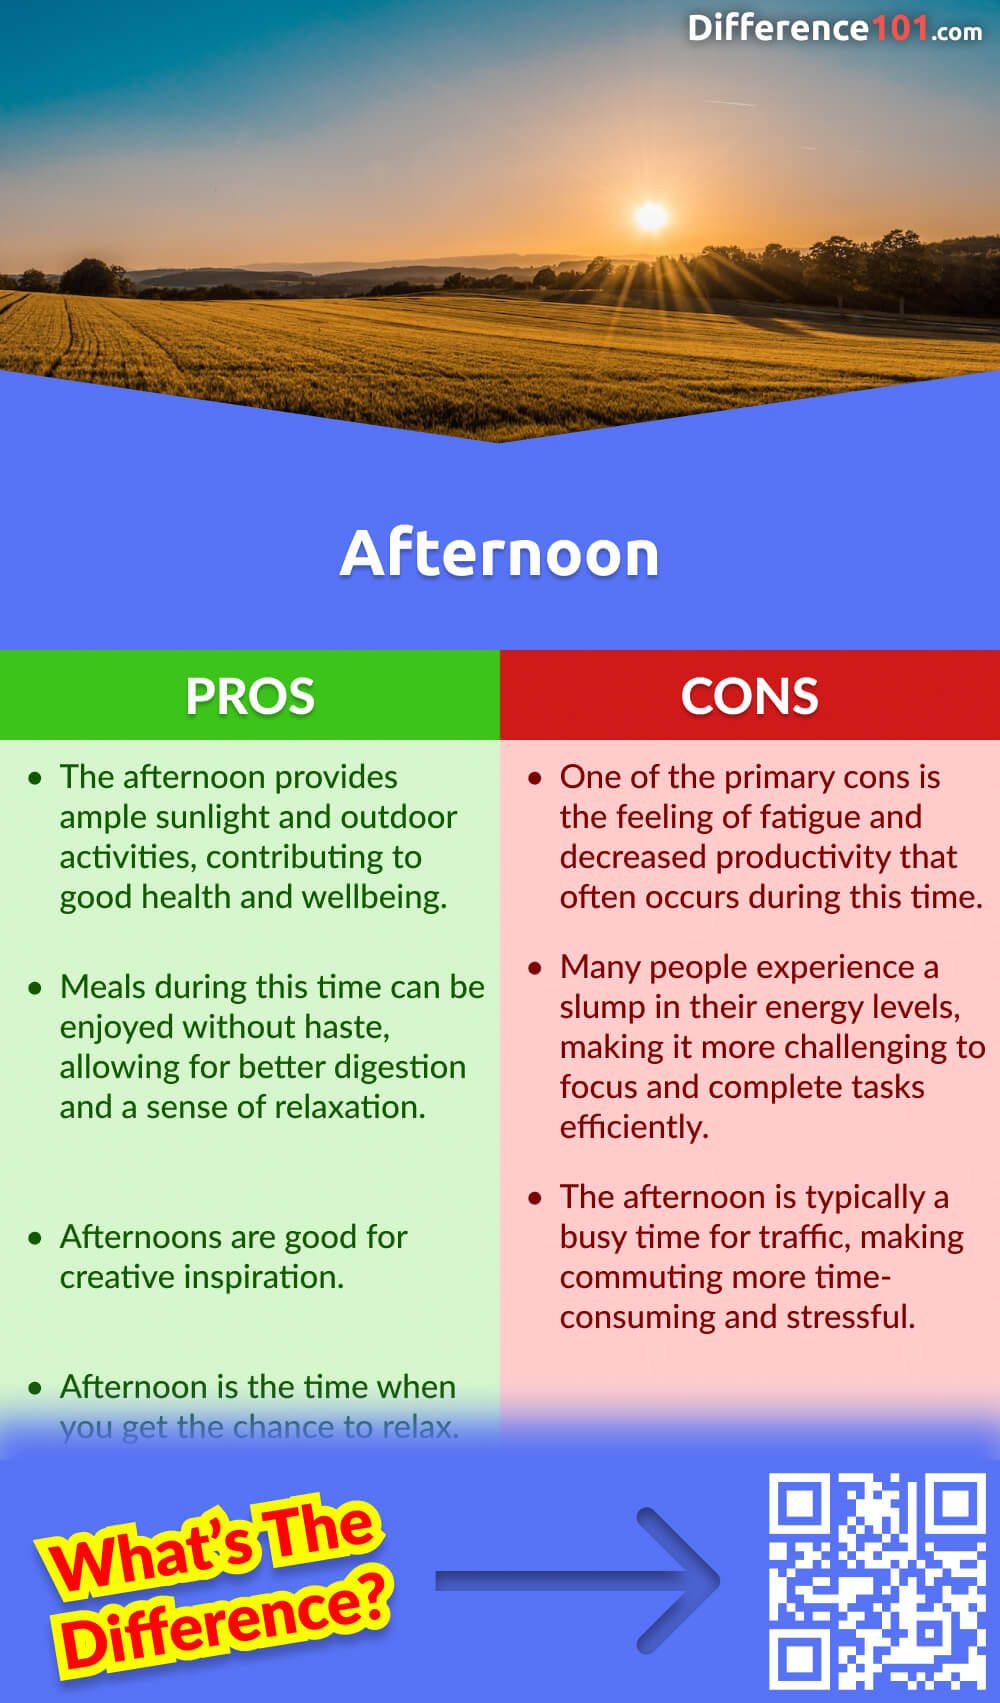 Afternoon Pros & Cons